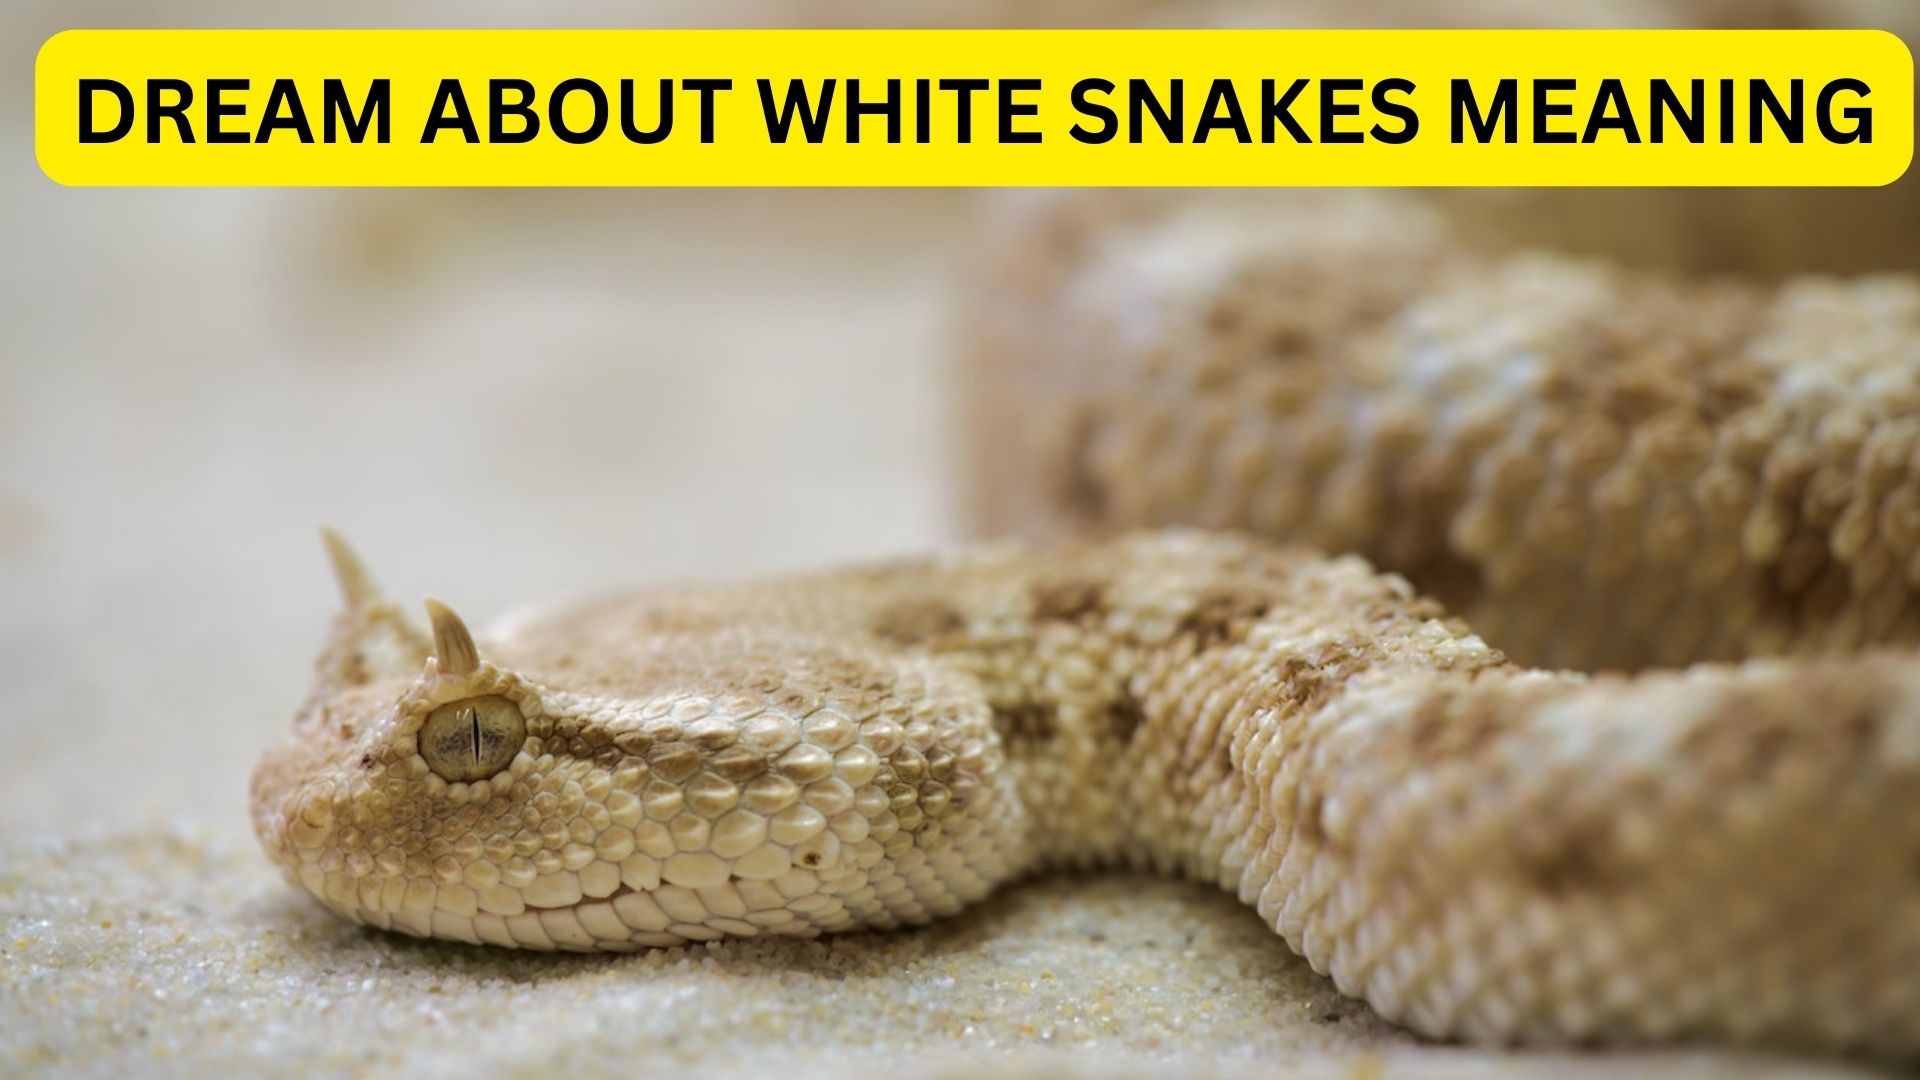 Dream About White Snakes Meaning - Energy, Purity, And New Beginnings